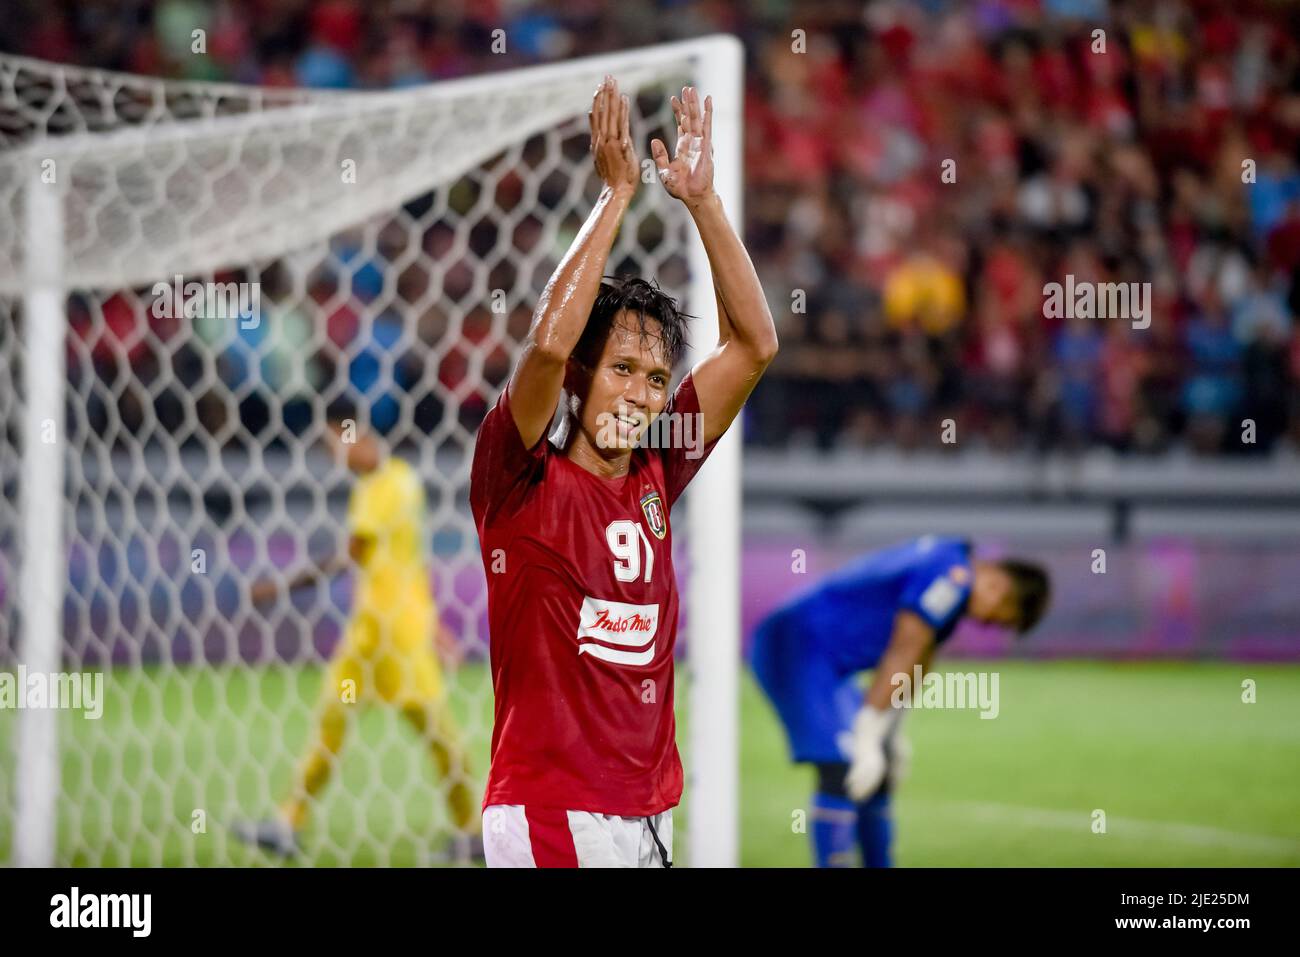 Gianyar, Bali, Indonesia. 24th June, 2022. RAHMAT SYAMSUDDIN LEO (91-left) of Bali United FC celebrates after scoring a goal. A match from the Asian Football Confederation (AFC) Cup 2022 group G of South East Asia group qualification between Bali United FC from Indonesia and Kedah Darul Aman from Malaysia at I WAYAN DIPTA stadium ended with a 2-0 victory for Bali United FC. (Credit Image: © Dicky Bisinglasi/ZUMA Press Wire) Stock Photo